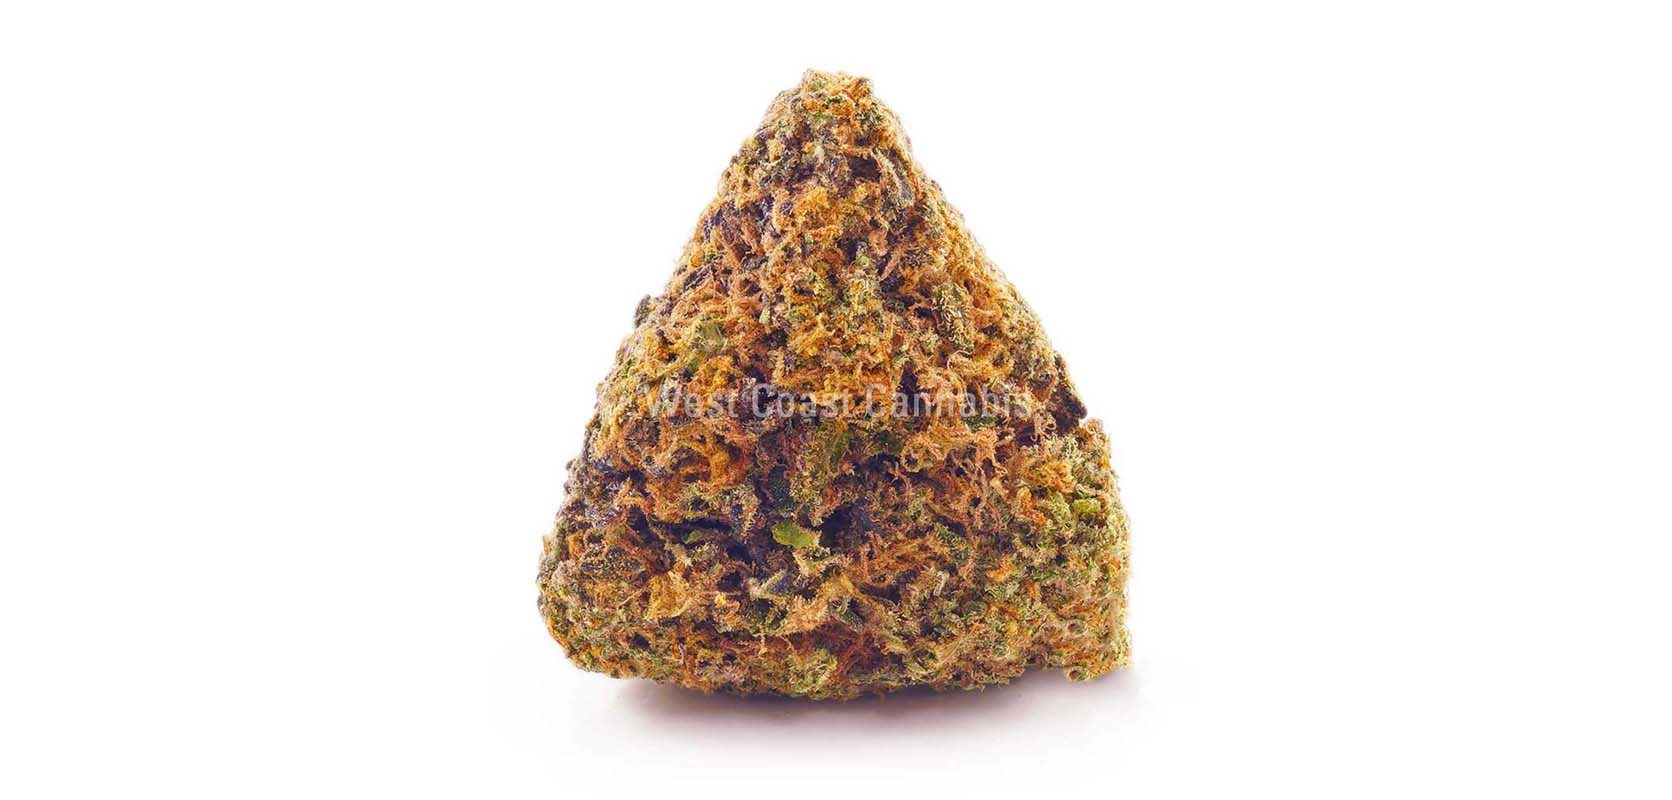 Gelato weed online Canada from West Coast Cannabis mail order marijuana Canada for dispensary weed and edibles online.